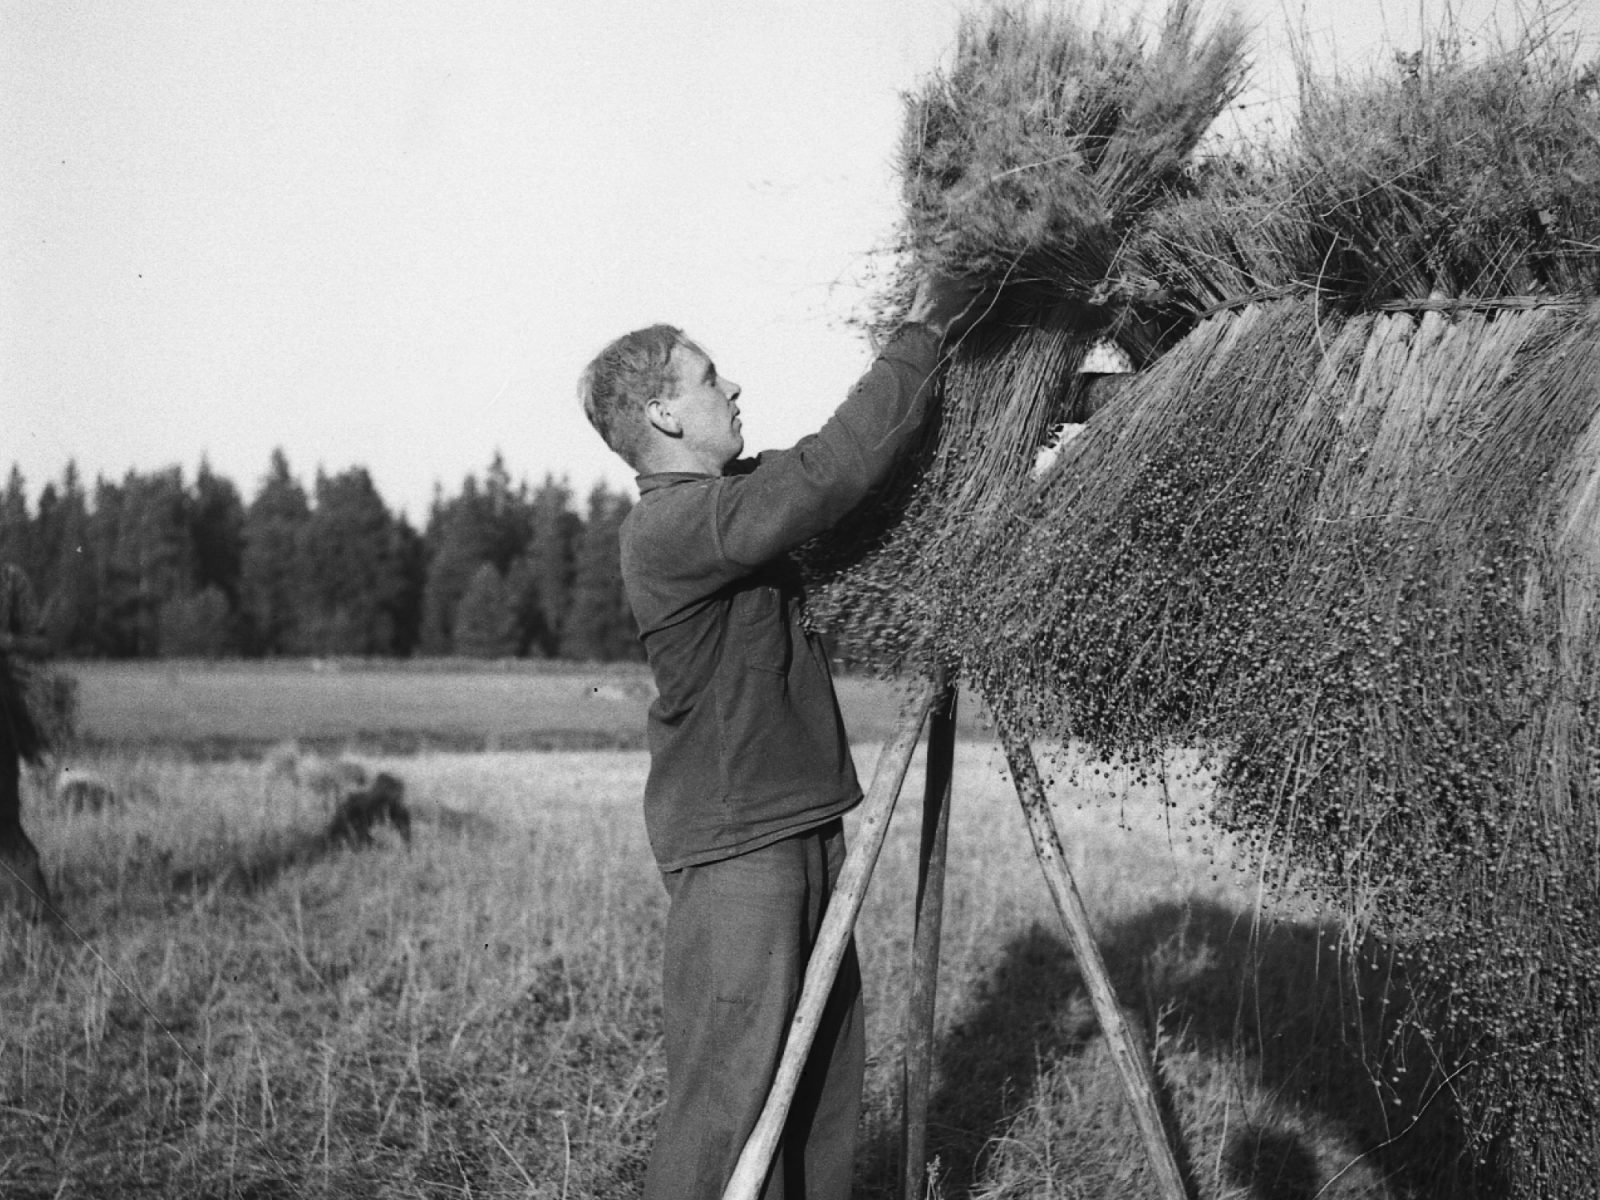 Man in field hanging harvested flax to dry, 1940s.